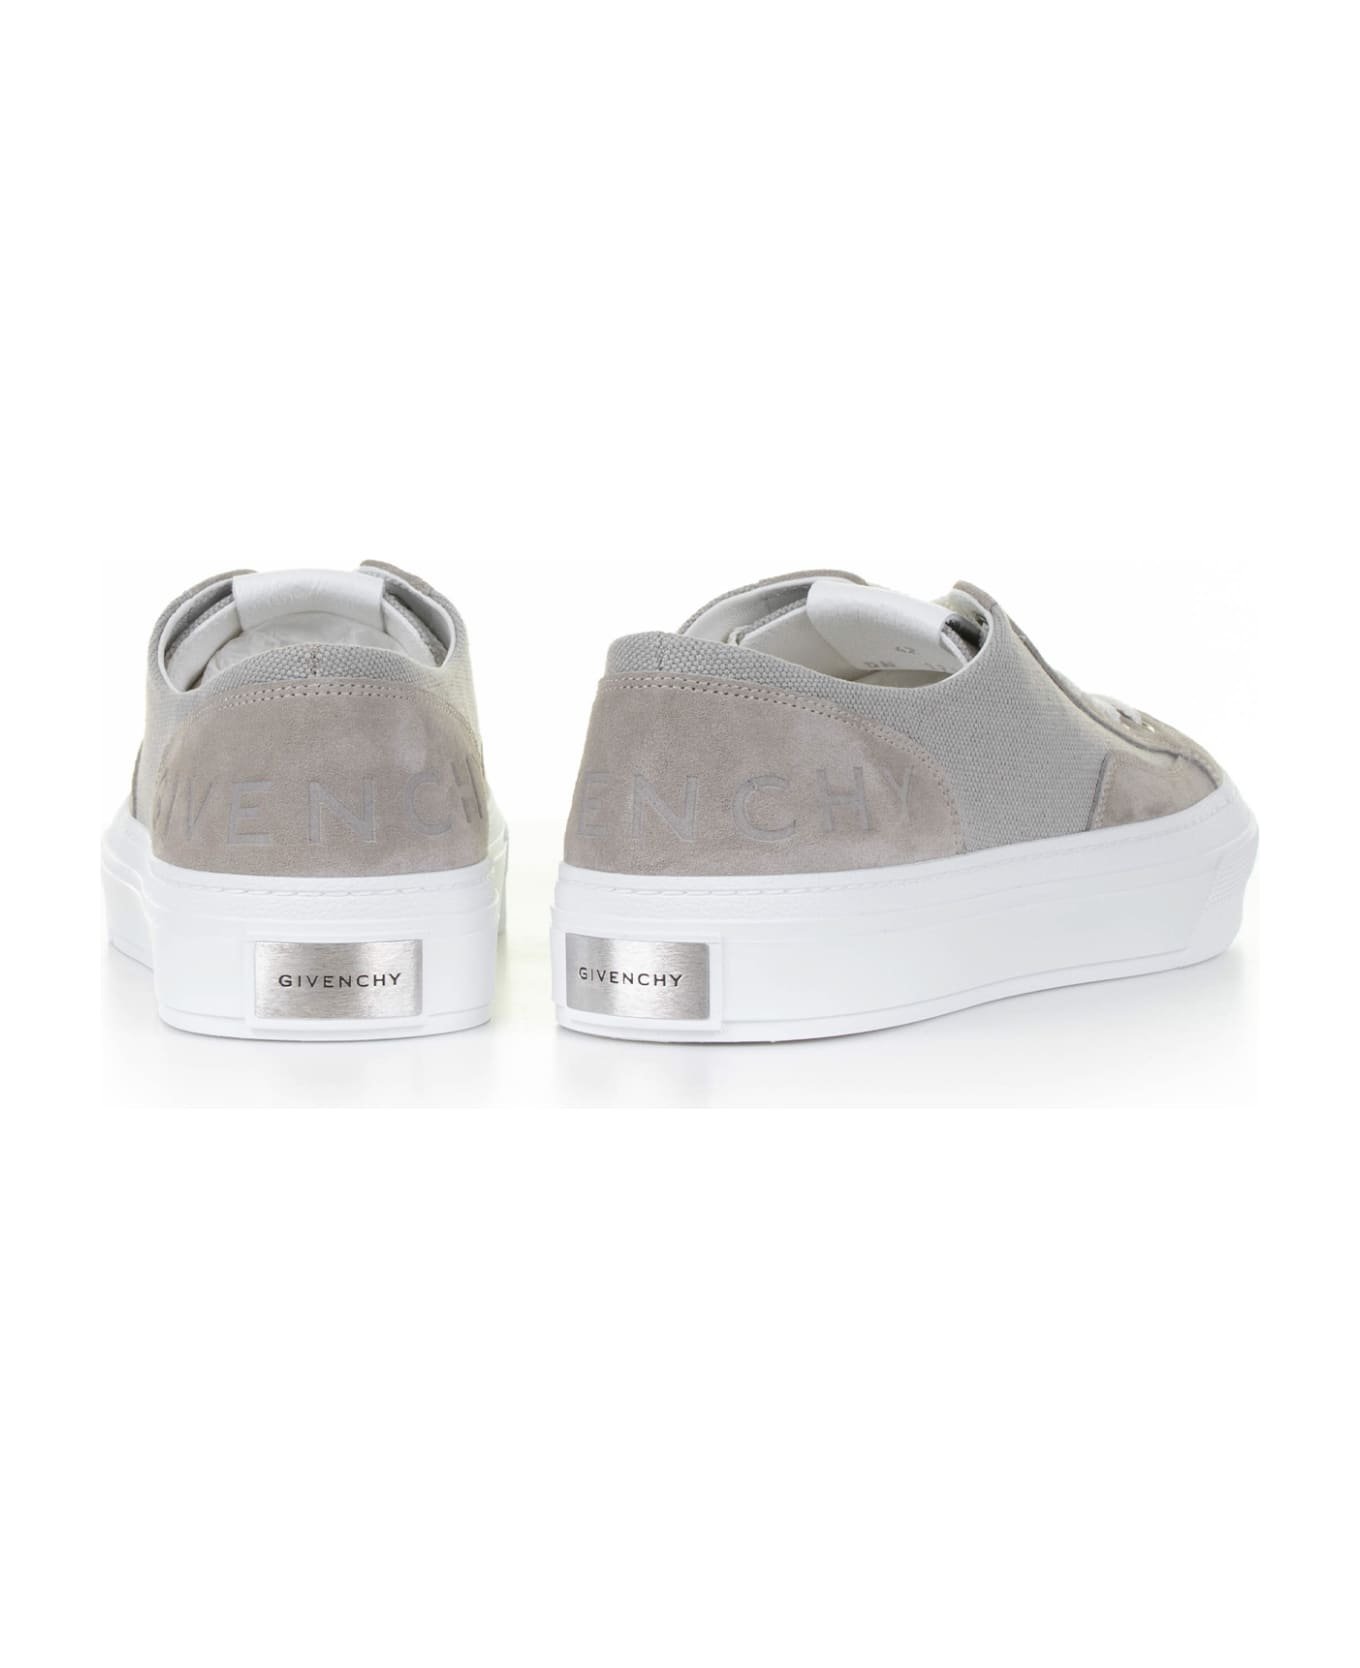 Givenchy City Low Sneakers - MEDIUM GREY